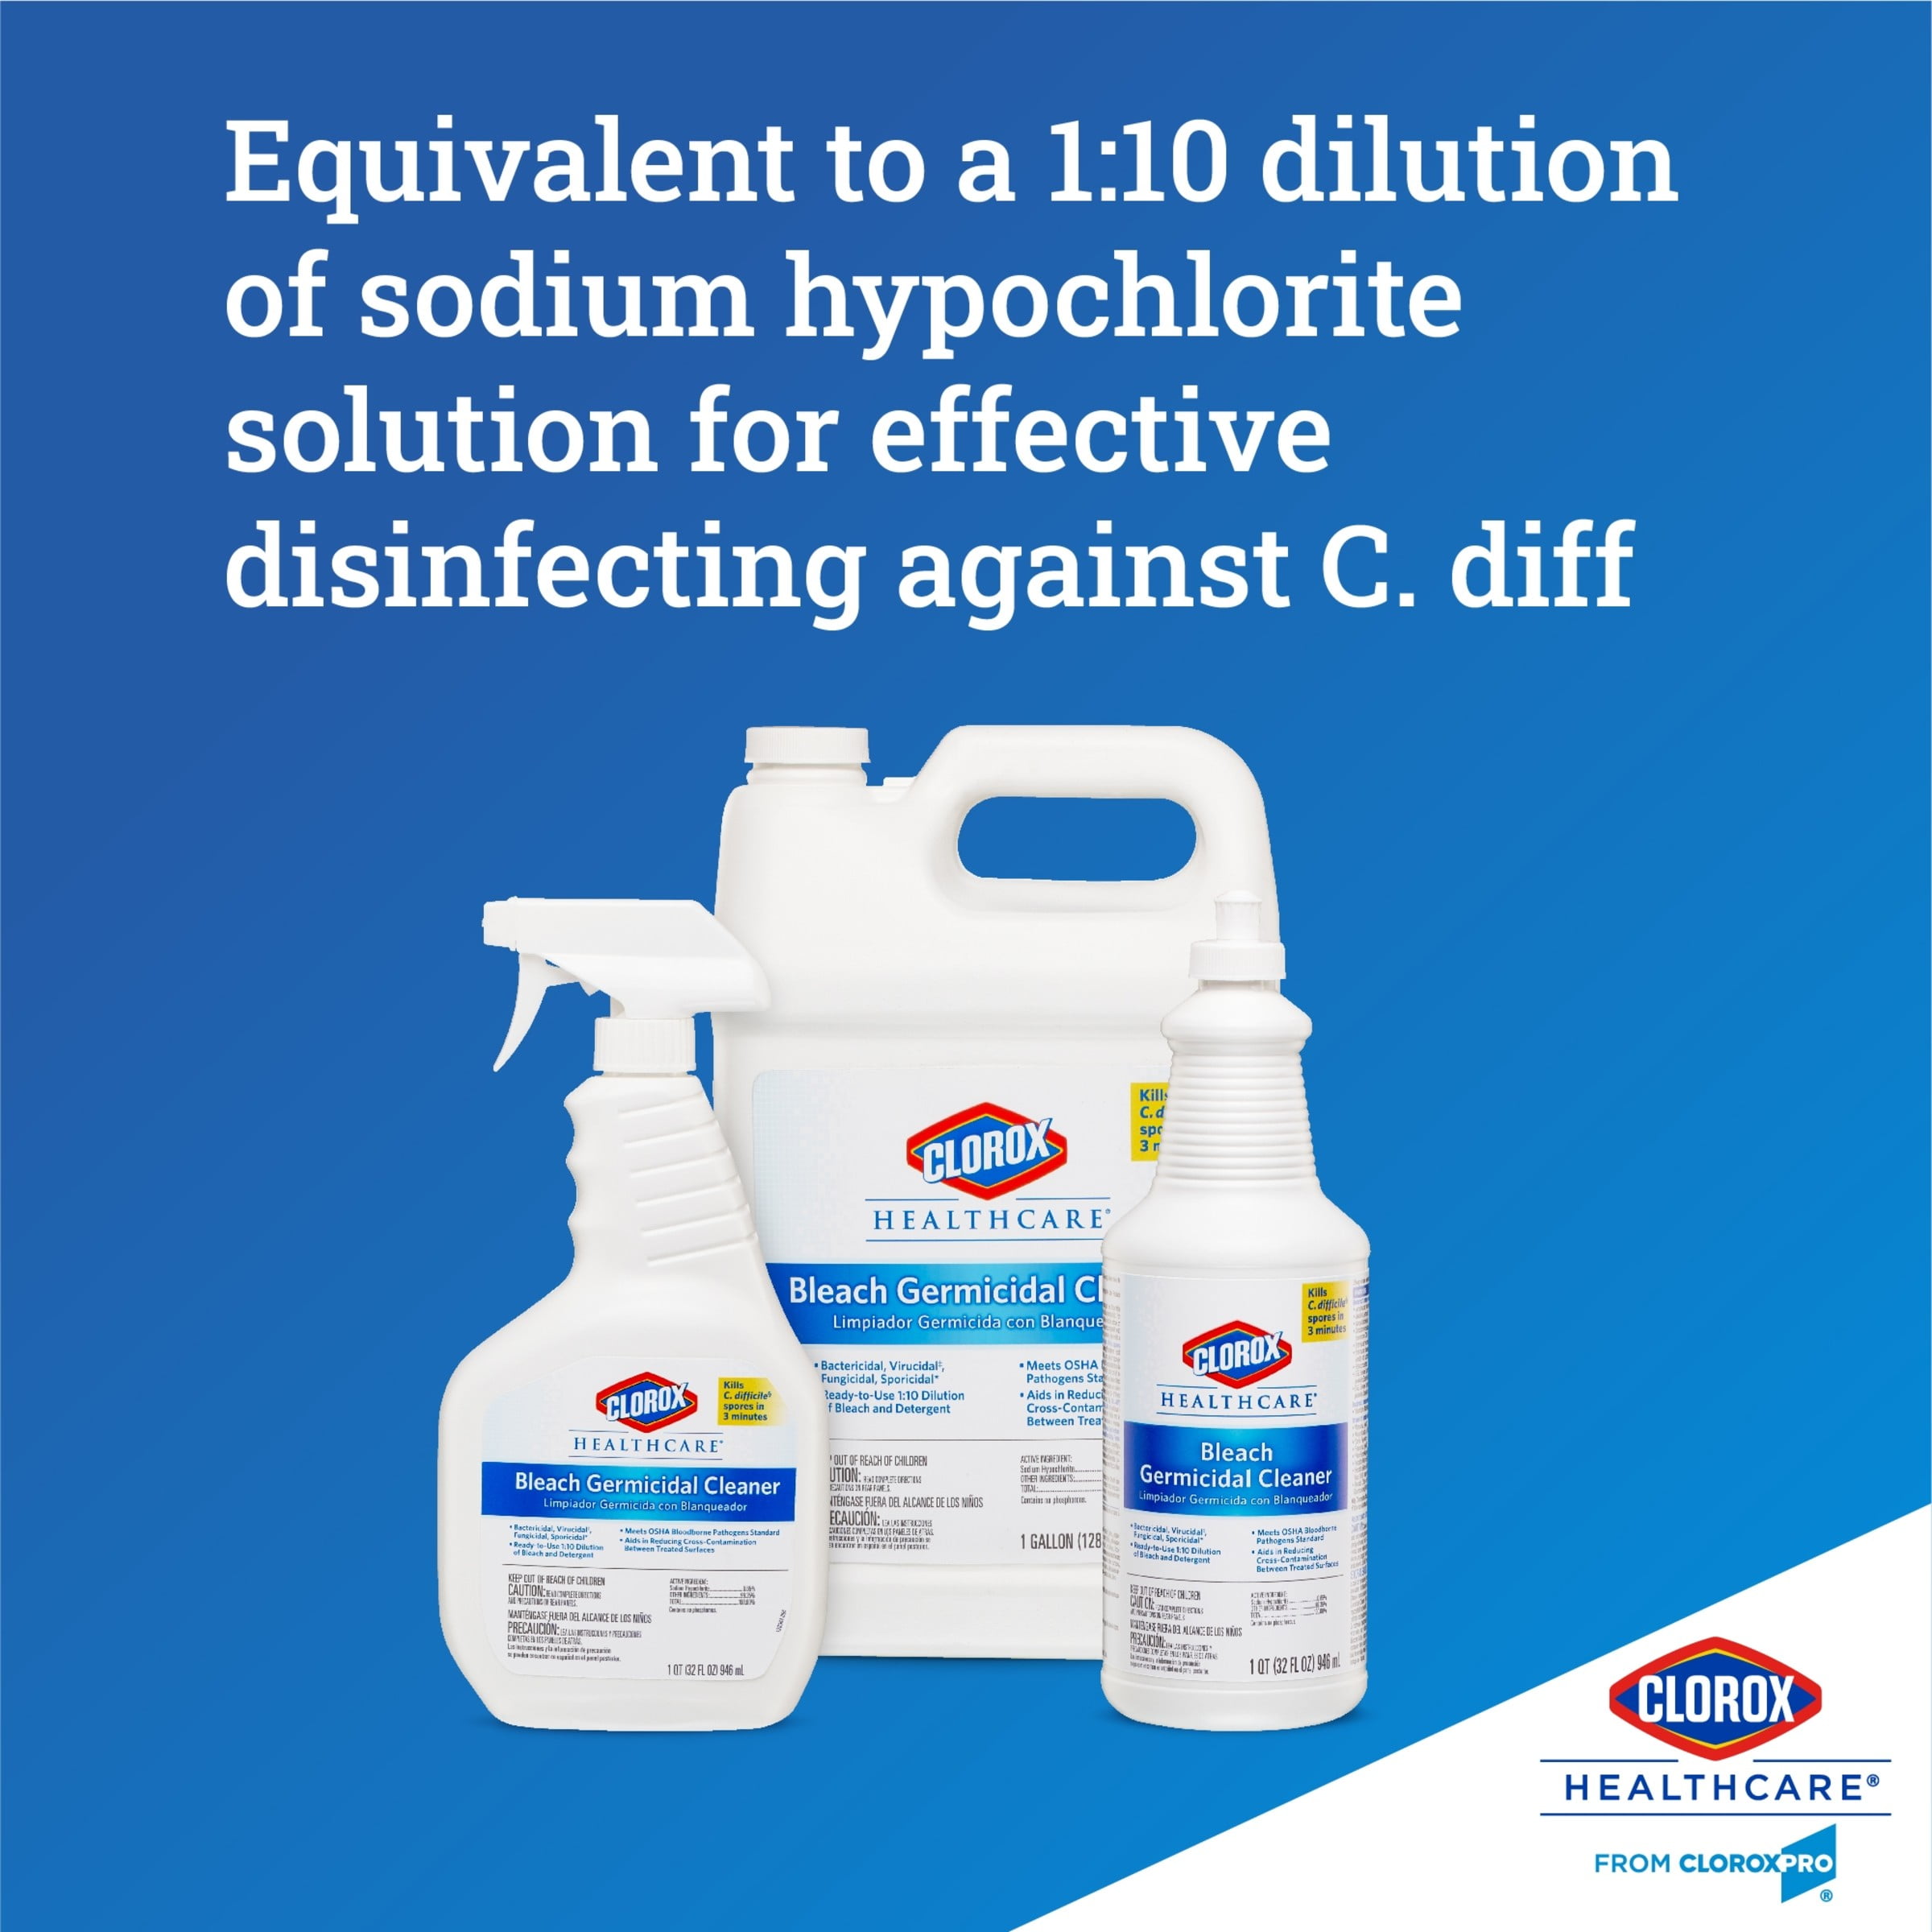 Clorox Healthcare Bleach Germicidal Cleaner - The Office Point